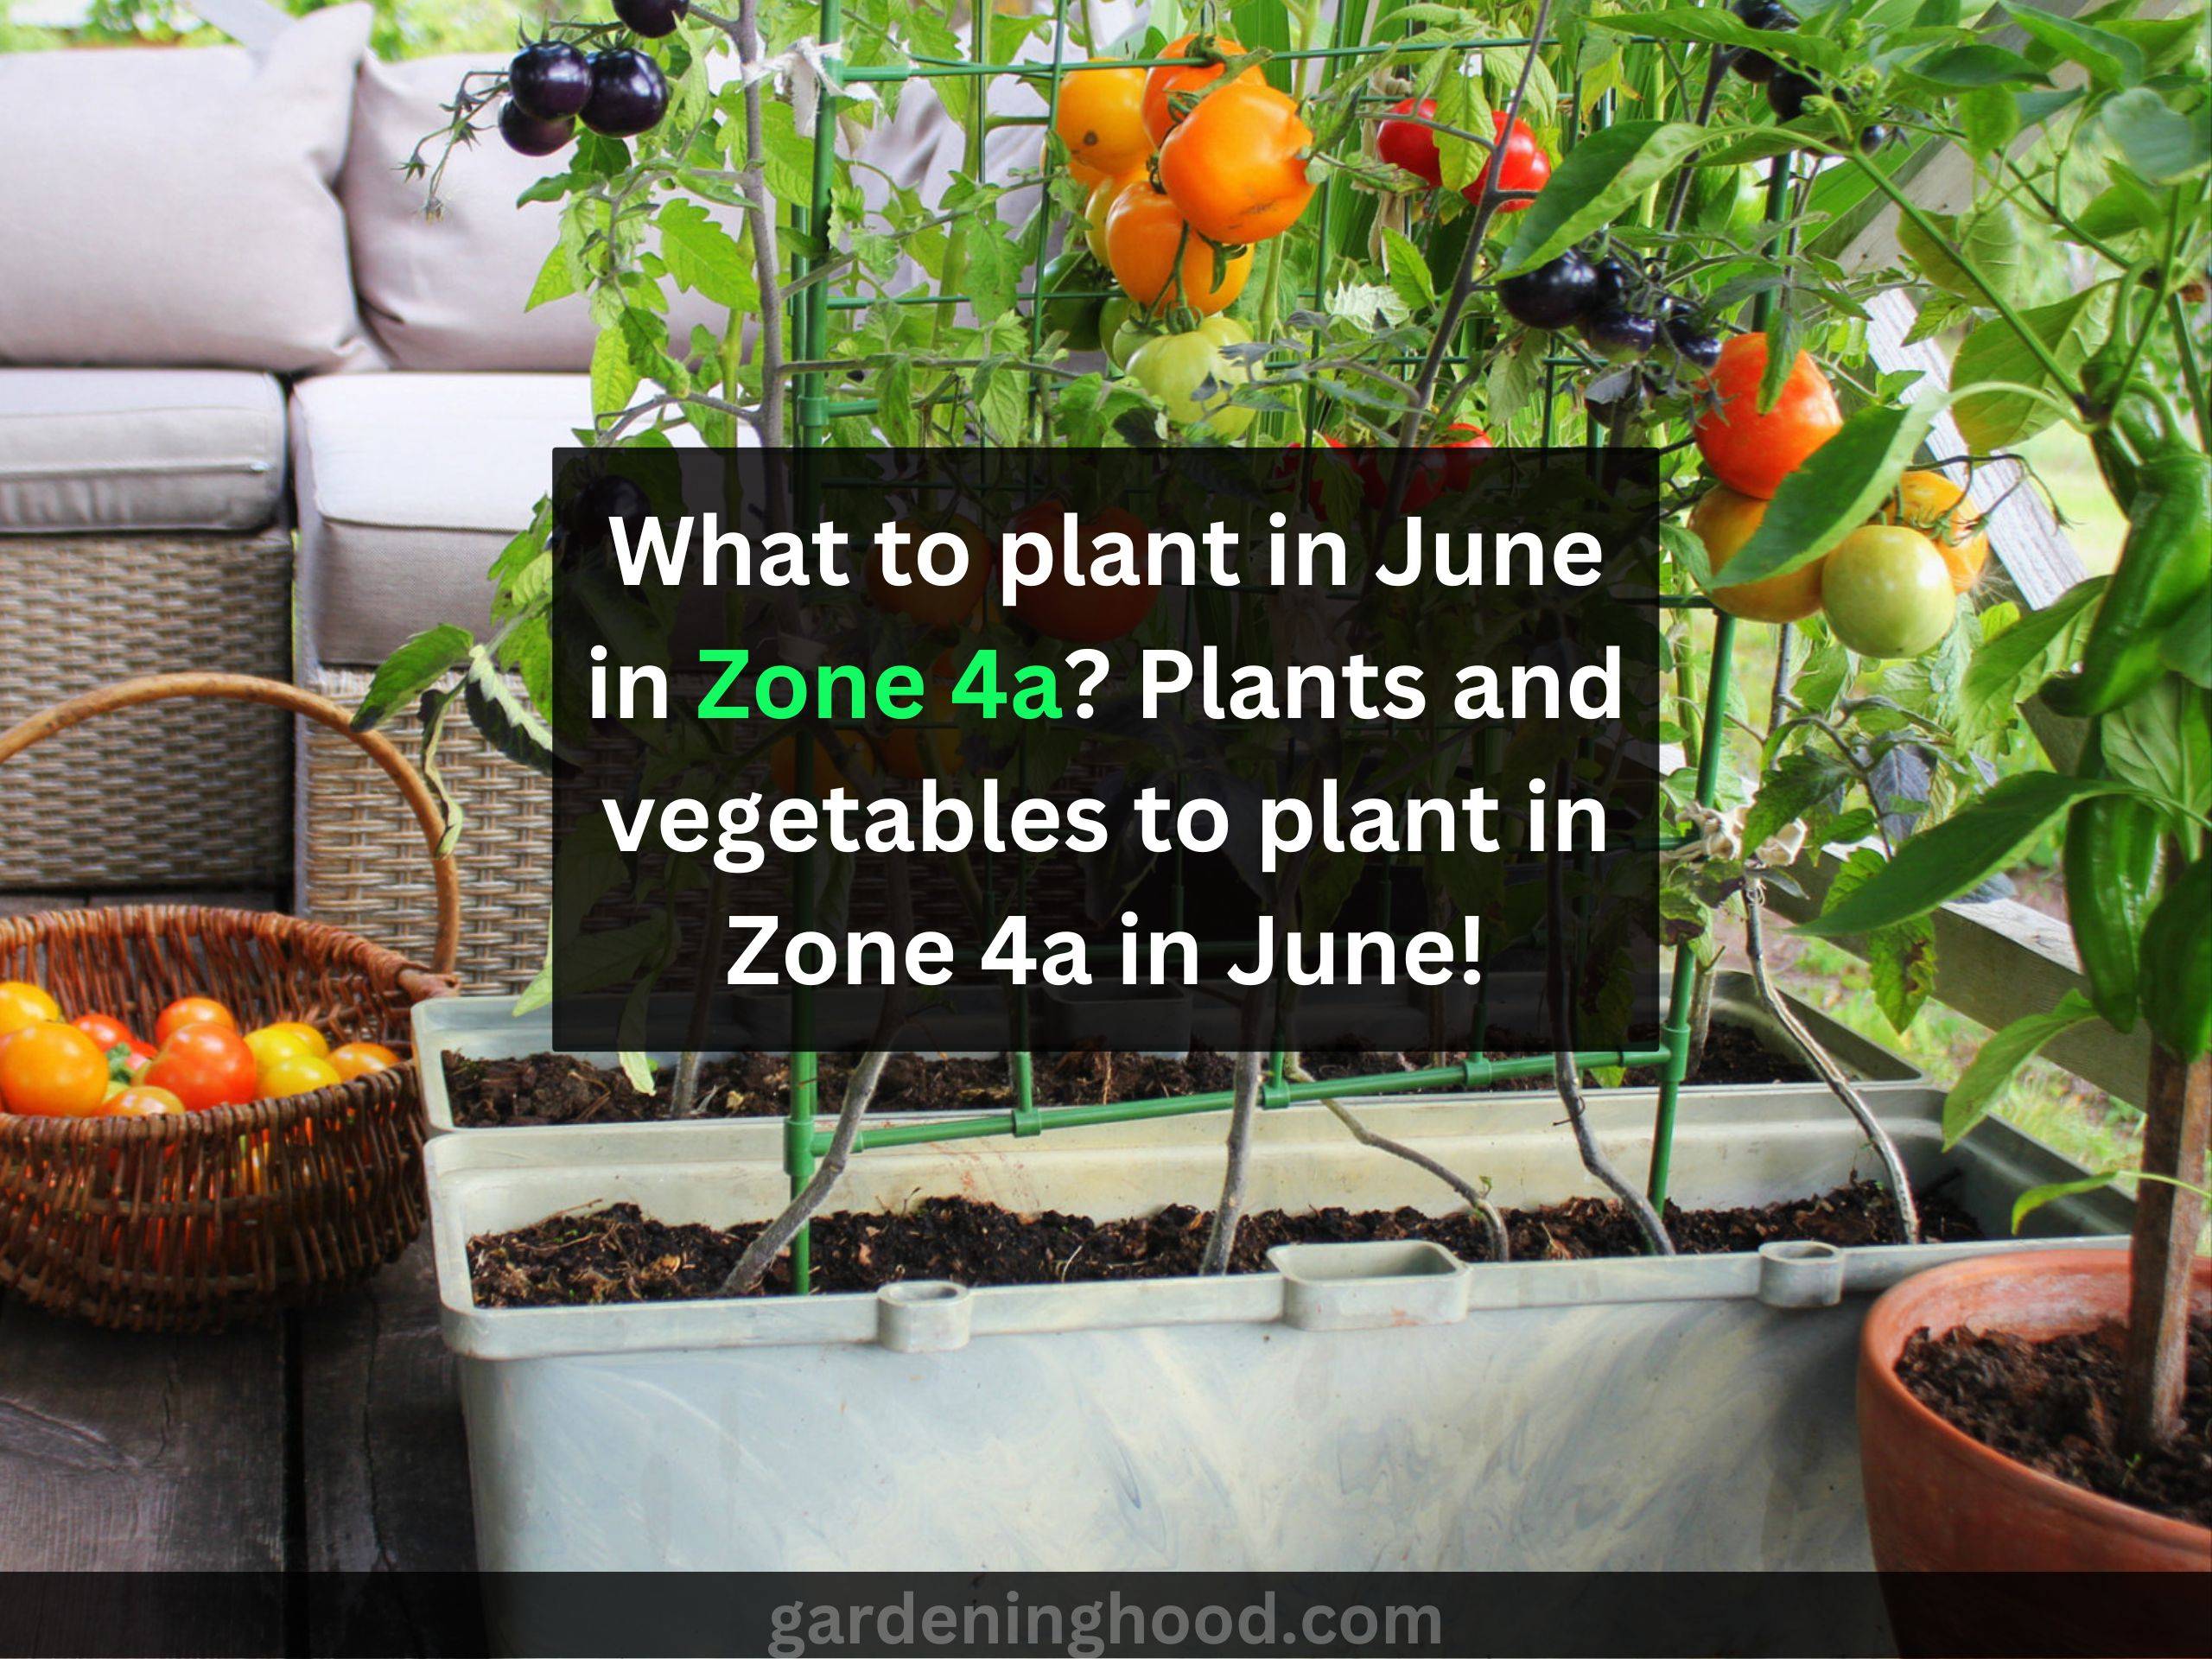 What to plant in June in Zone 4a? Plants and vegetables to plant in Zone 4a in June!